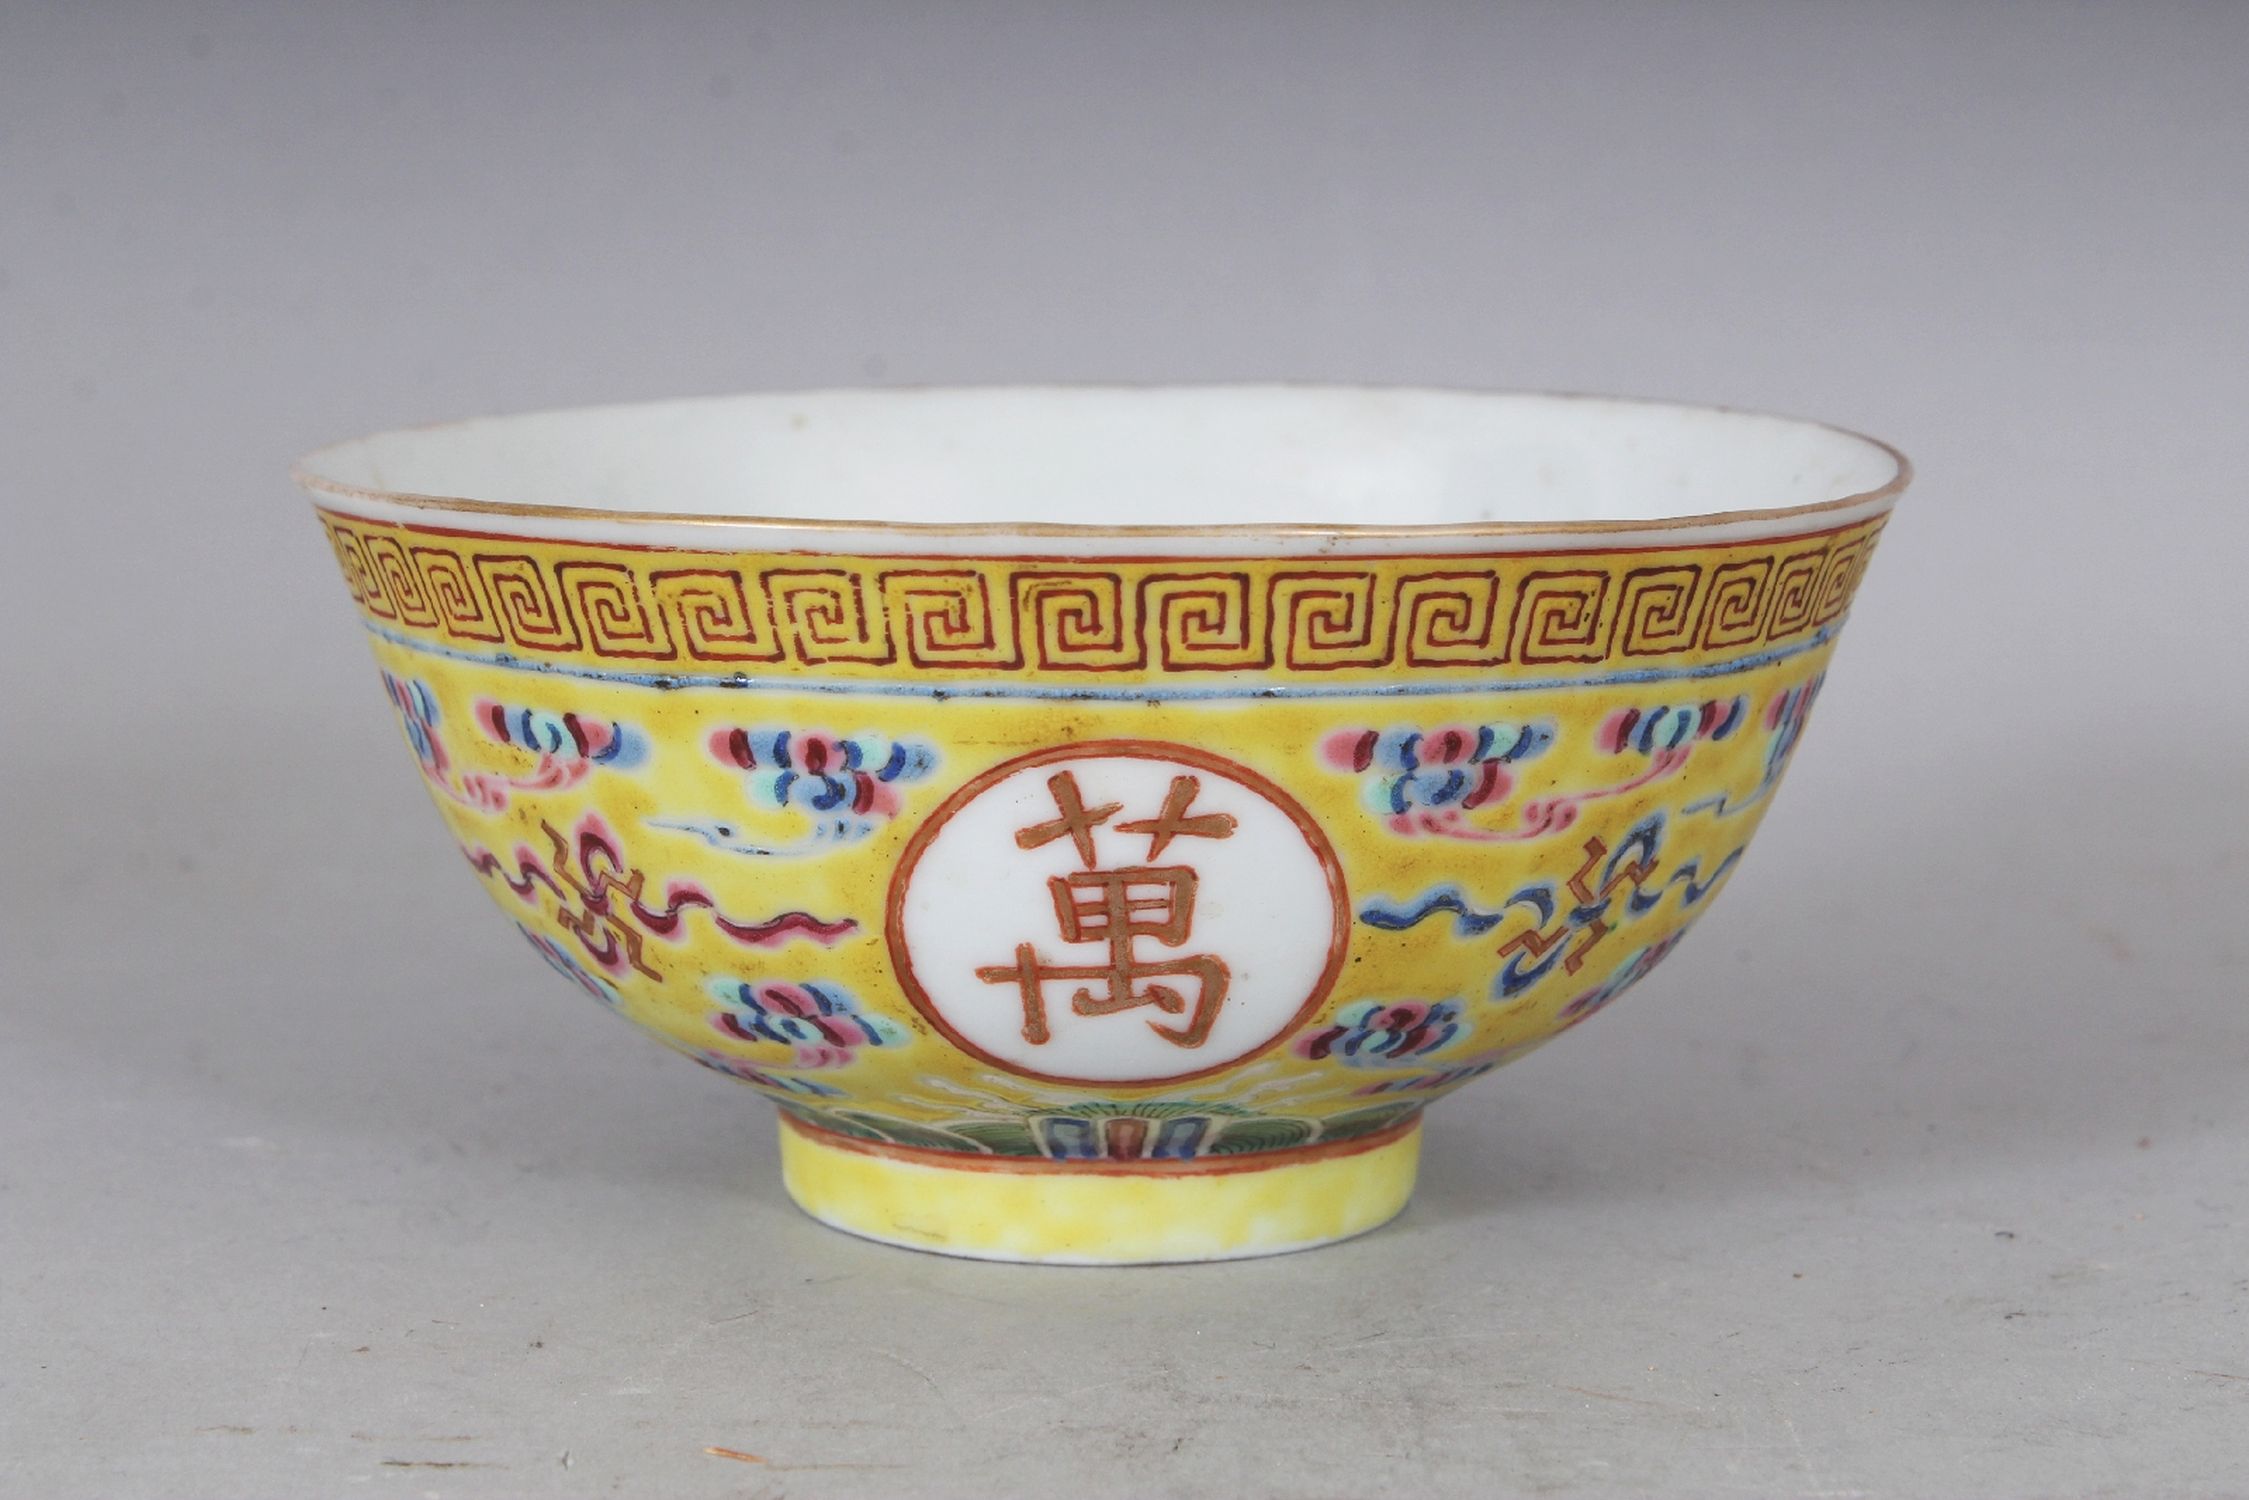 A GOOD QUALITY CHINESE GUANGXU MARK & PERIOD FAMILLE ROSE YELLOW GROUND PORCELAIN BOWL, the sides